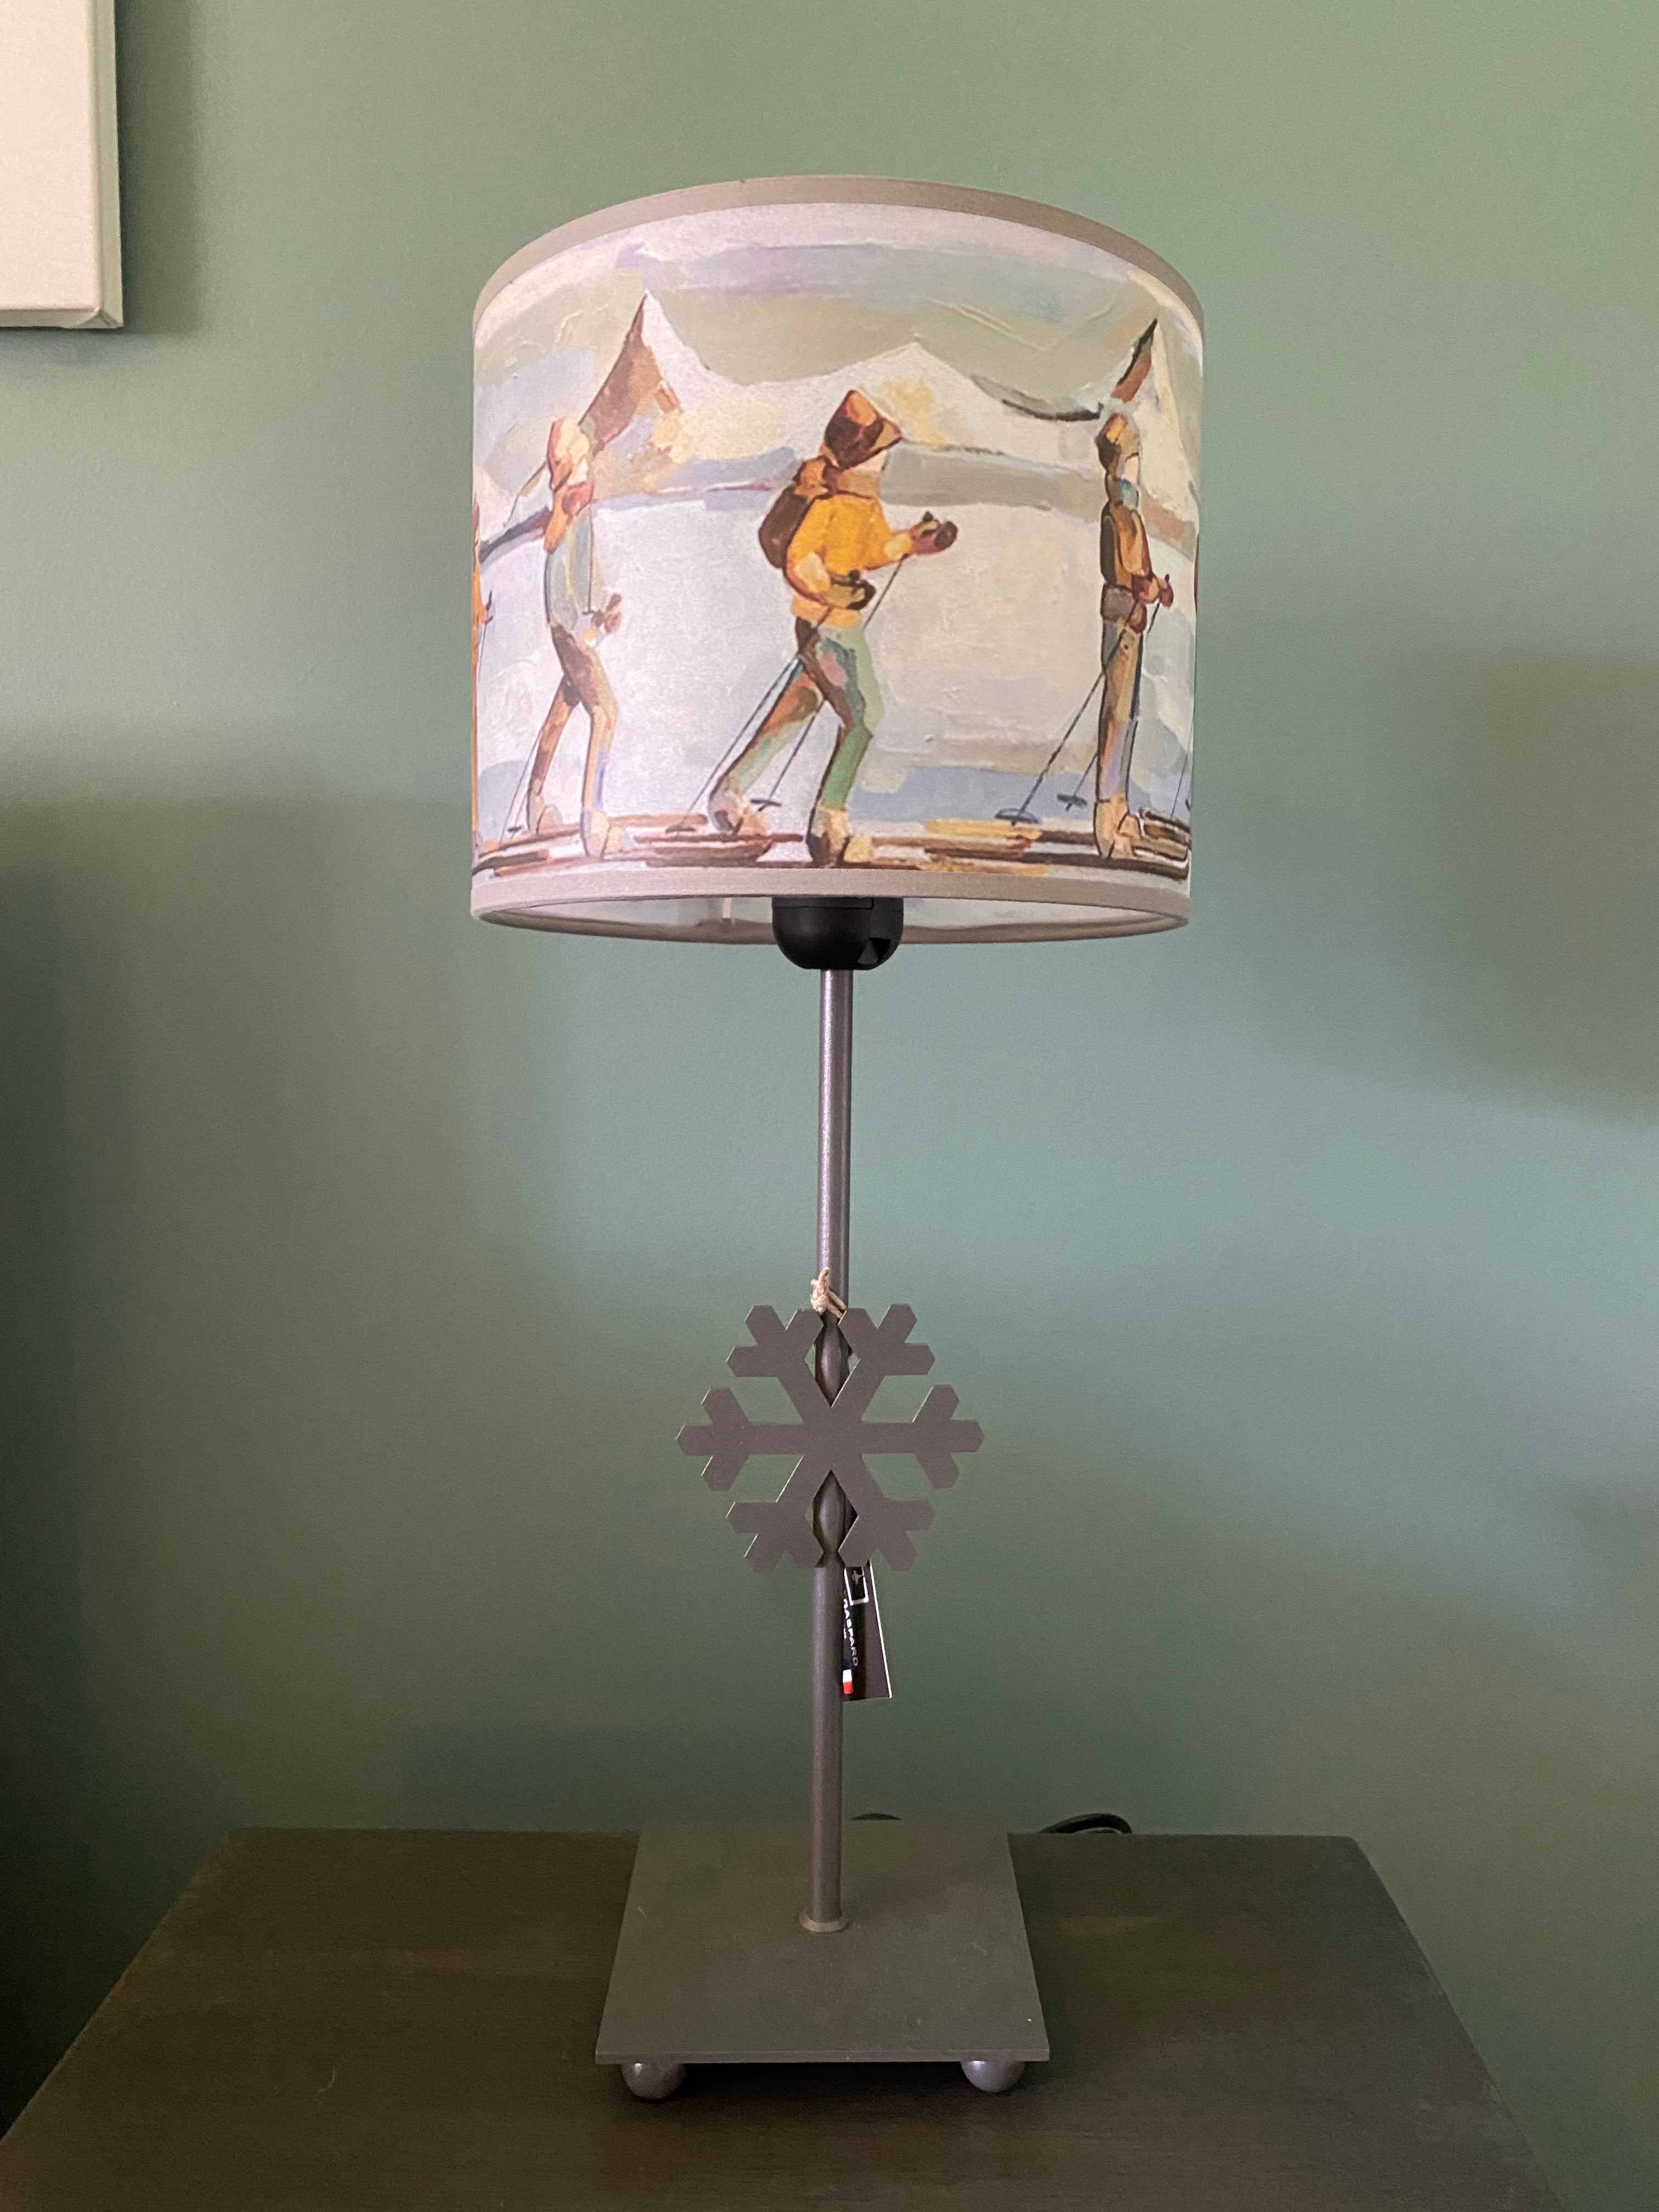 lamp with a square grey solid metal base supporting a rod with ca snowflake mid way up the rod, topped by a colourful canvas lamp shade. The shade depicts people on skis skinning across the snow in a line, one in front of the other, with snow capped mountains in the background. Sitting on a wooden table behind a green wall. Different view of shade.